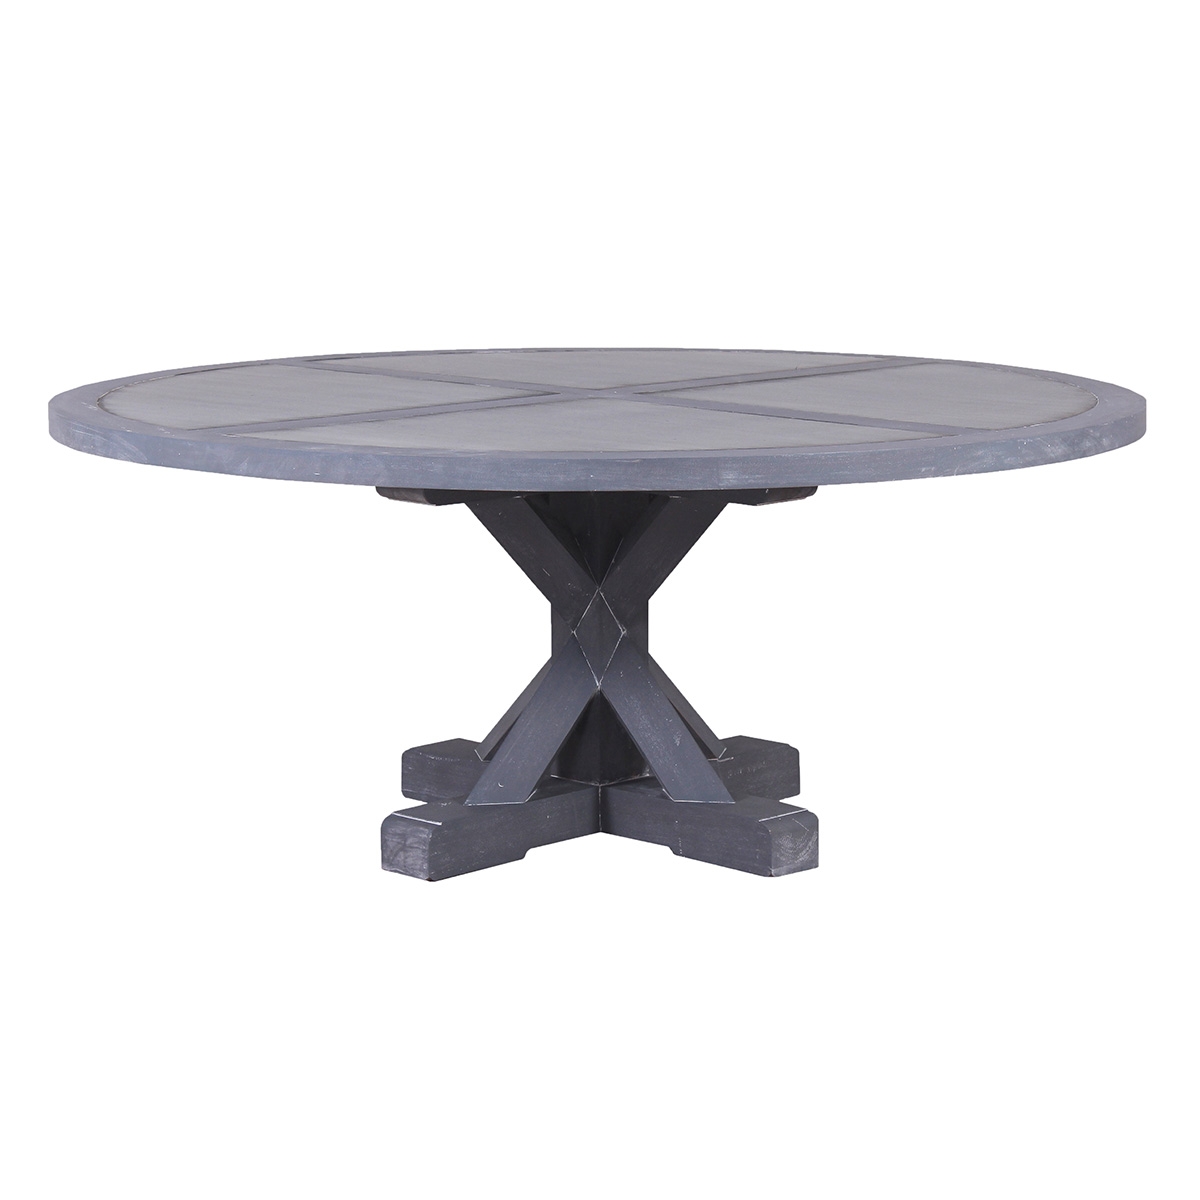 Bankside Trestle Round Dining Table 6'